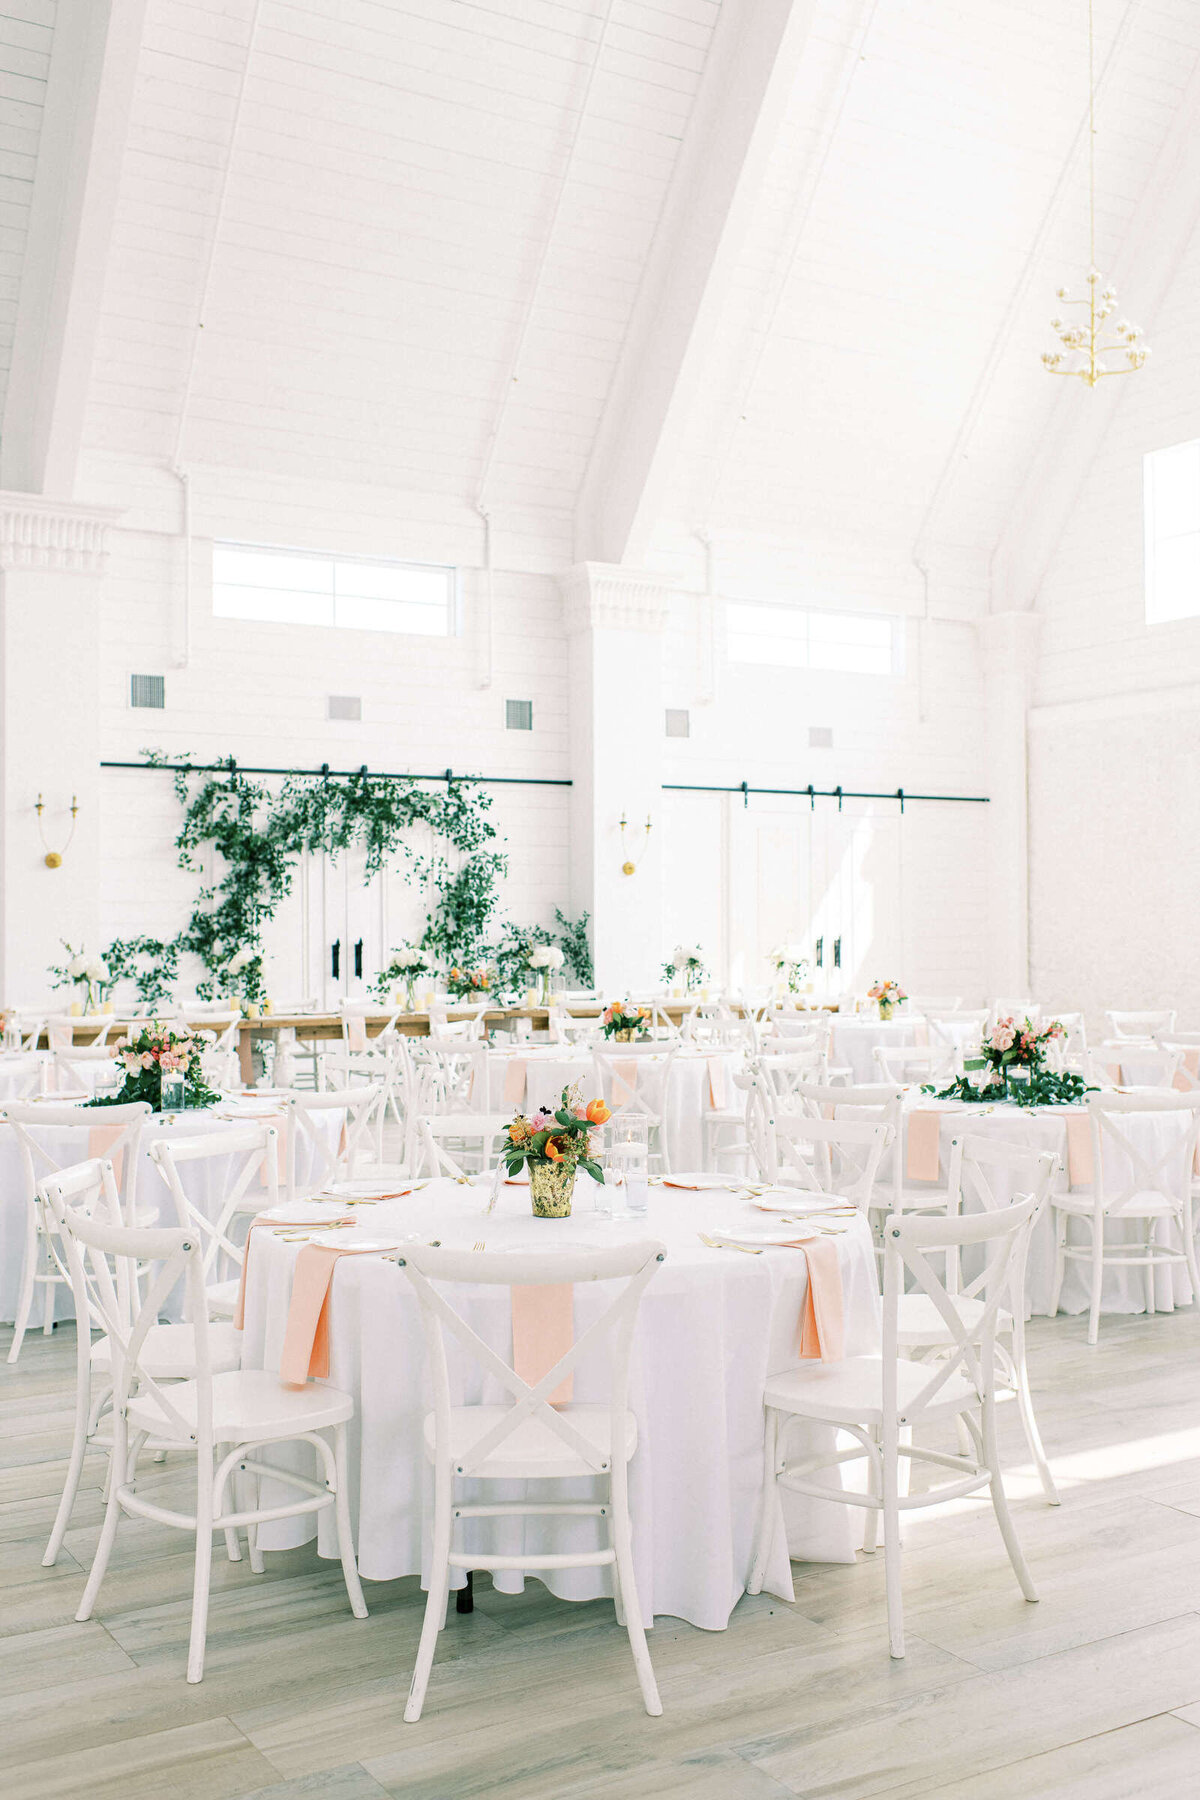 The Nest at Ruth Farms wedding reception hall with blush napkins and greenery